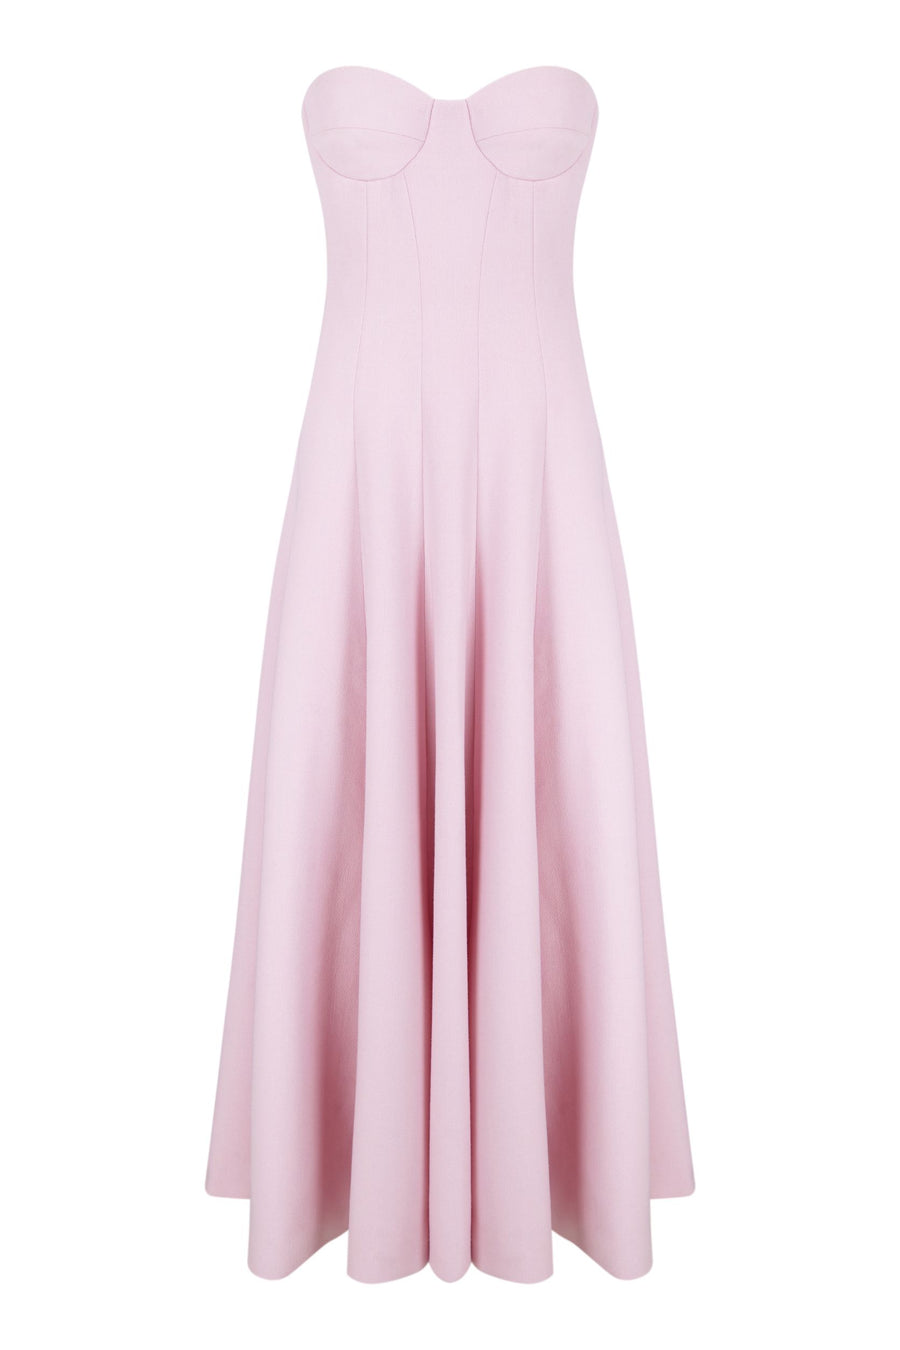 THE 2ND SKIN STRAPLESS CREPE MIDI DRESS. AVAILABLE IN TWO COLOUR OPTIONS.